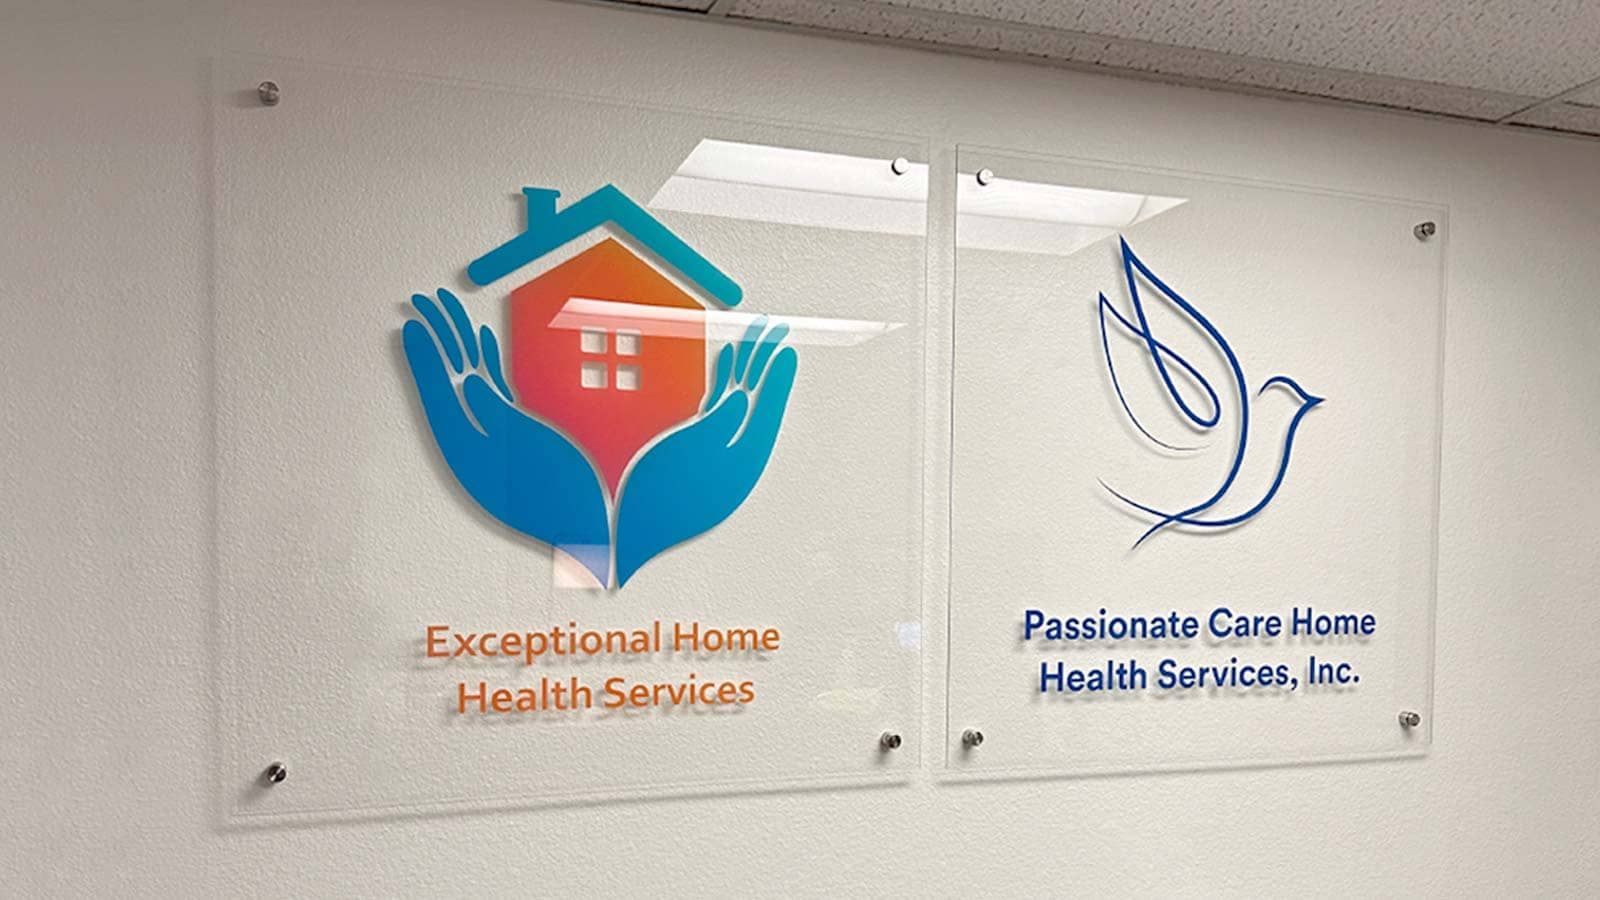 Exceptional Home Health Services acrylic signs indoors